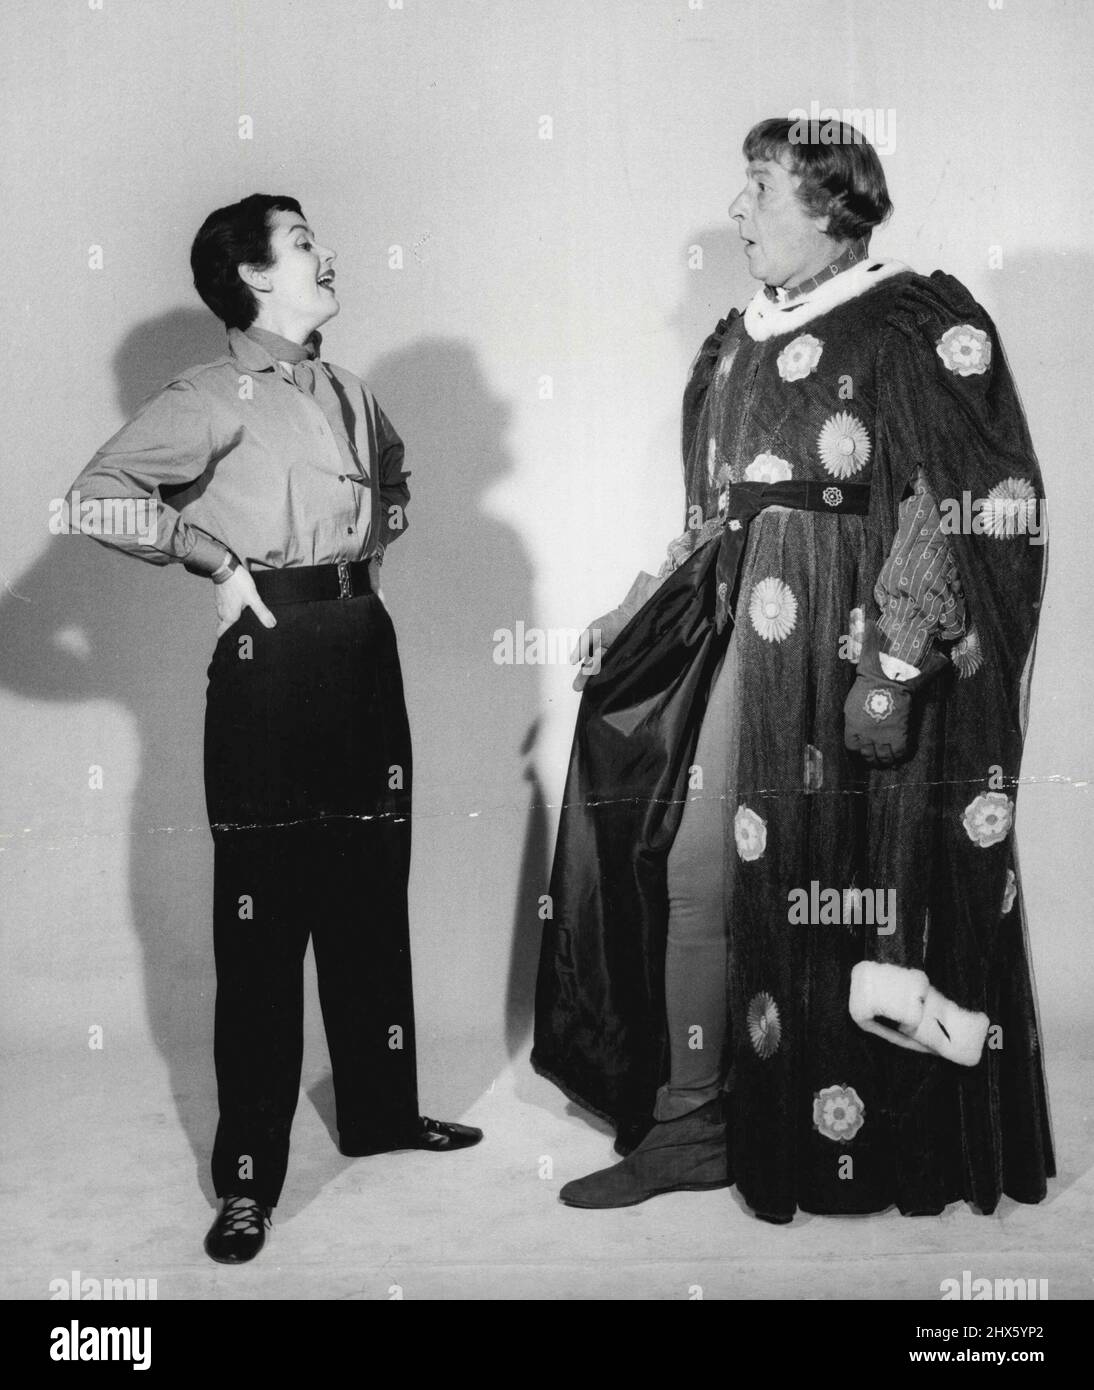 Sir Cedric and Lady Hardwicke. 22, Lady Hardwicke has fun at the sight of Sir Cedric's tights which he wears as Edward IV in Sir Laurence Oliver's production of Richard III at Shepperton Studios. December 21, 1954. (Photo by Jack Esten).;Sir Cedric and Lady Hardwicke. 22, Lady Hardwicke has fun at the sight of Sir Cedric's tights which he wears as Edward IV in Sir Laurence Oliver's production of Richard III at Shepperton Studios. Stock Photo